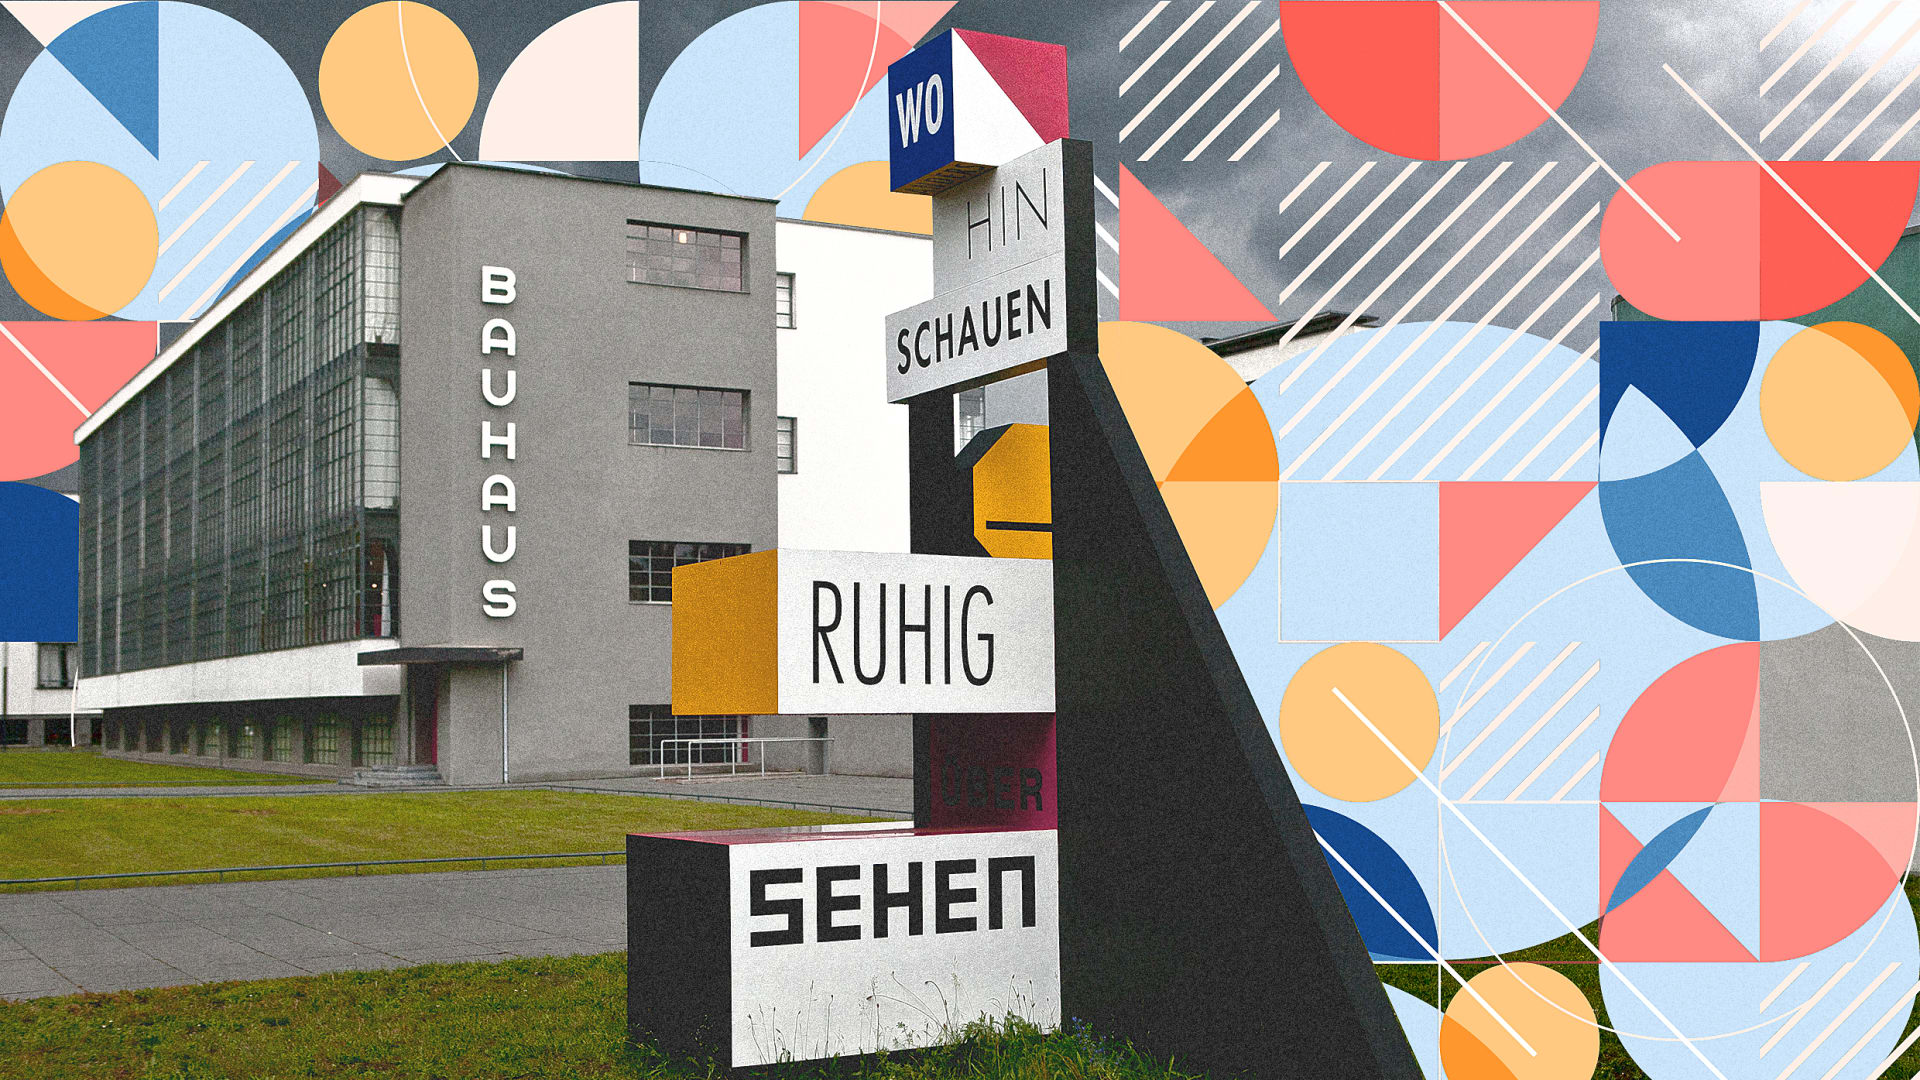 Toward a new Bauhaus: How a century-old design movement could help save the planet